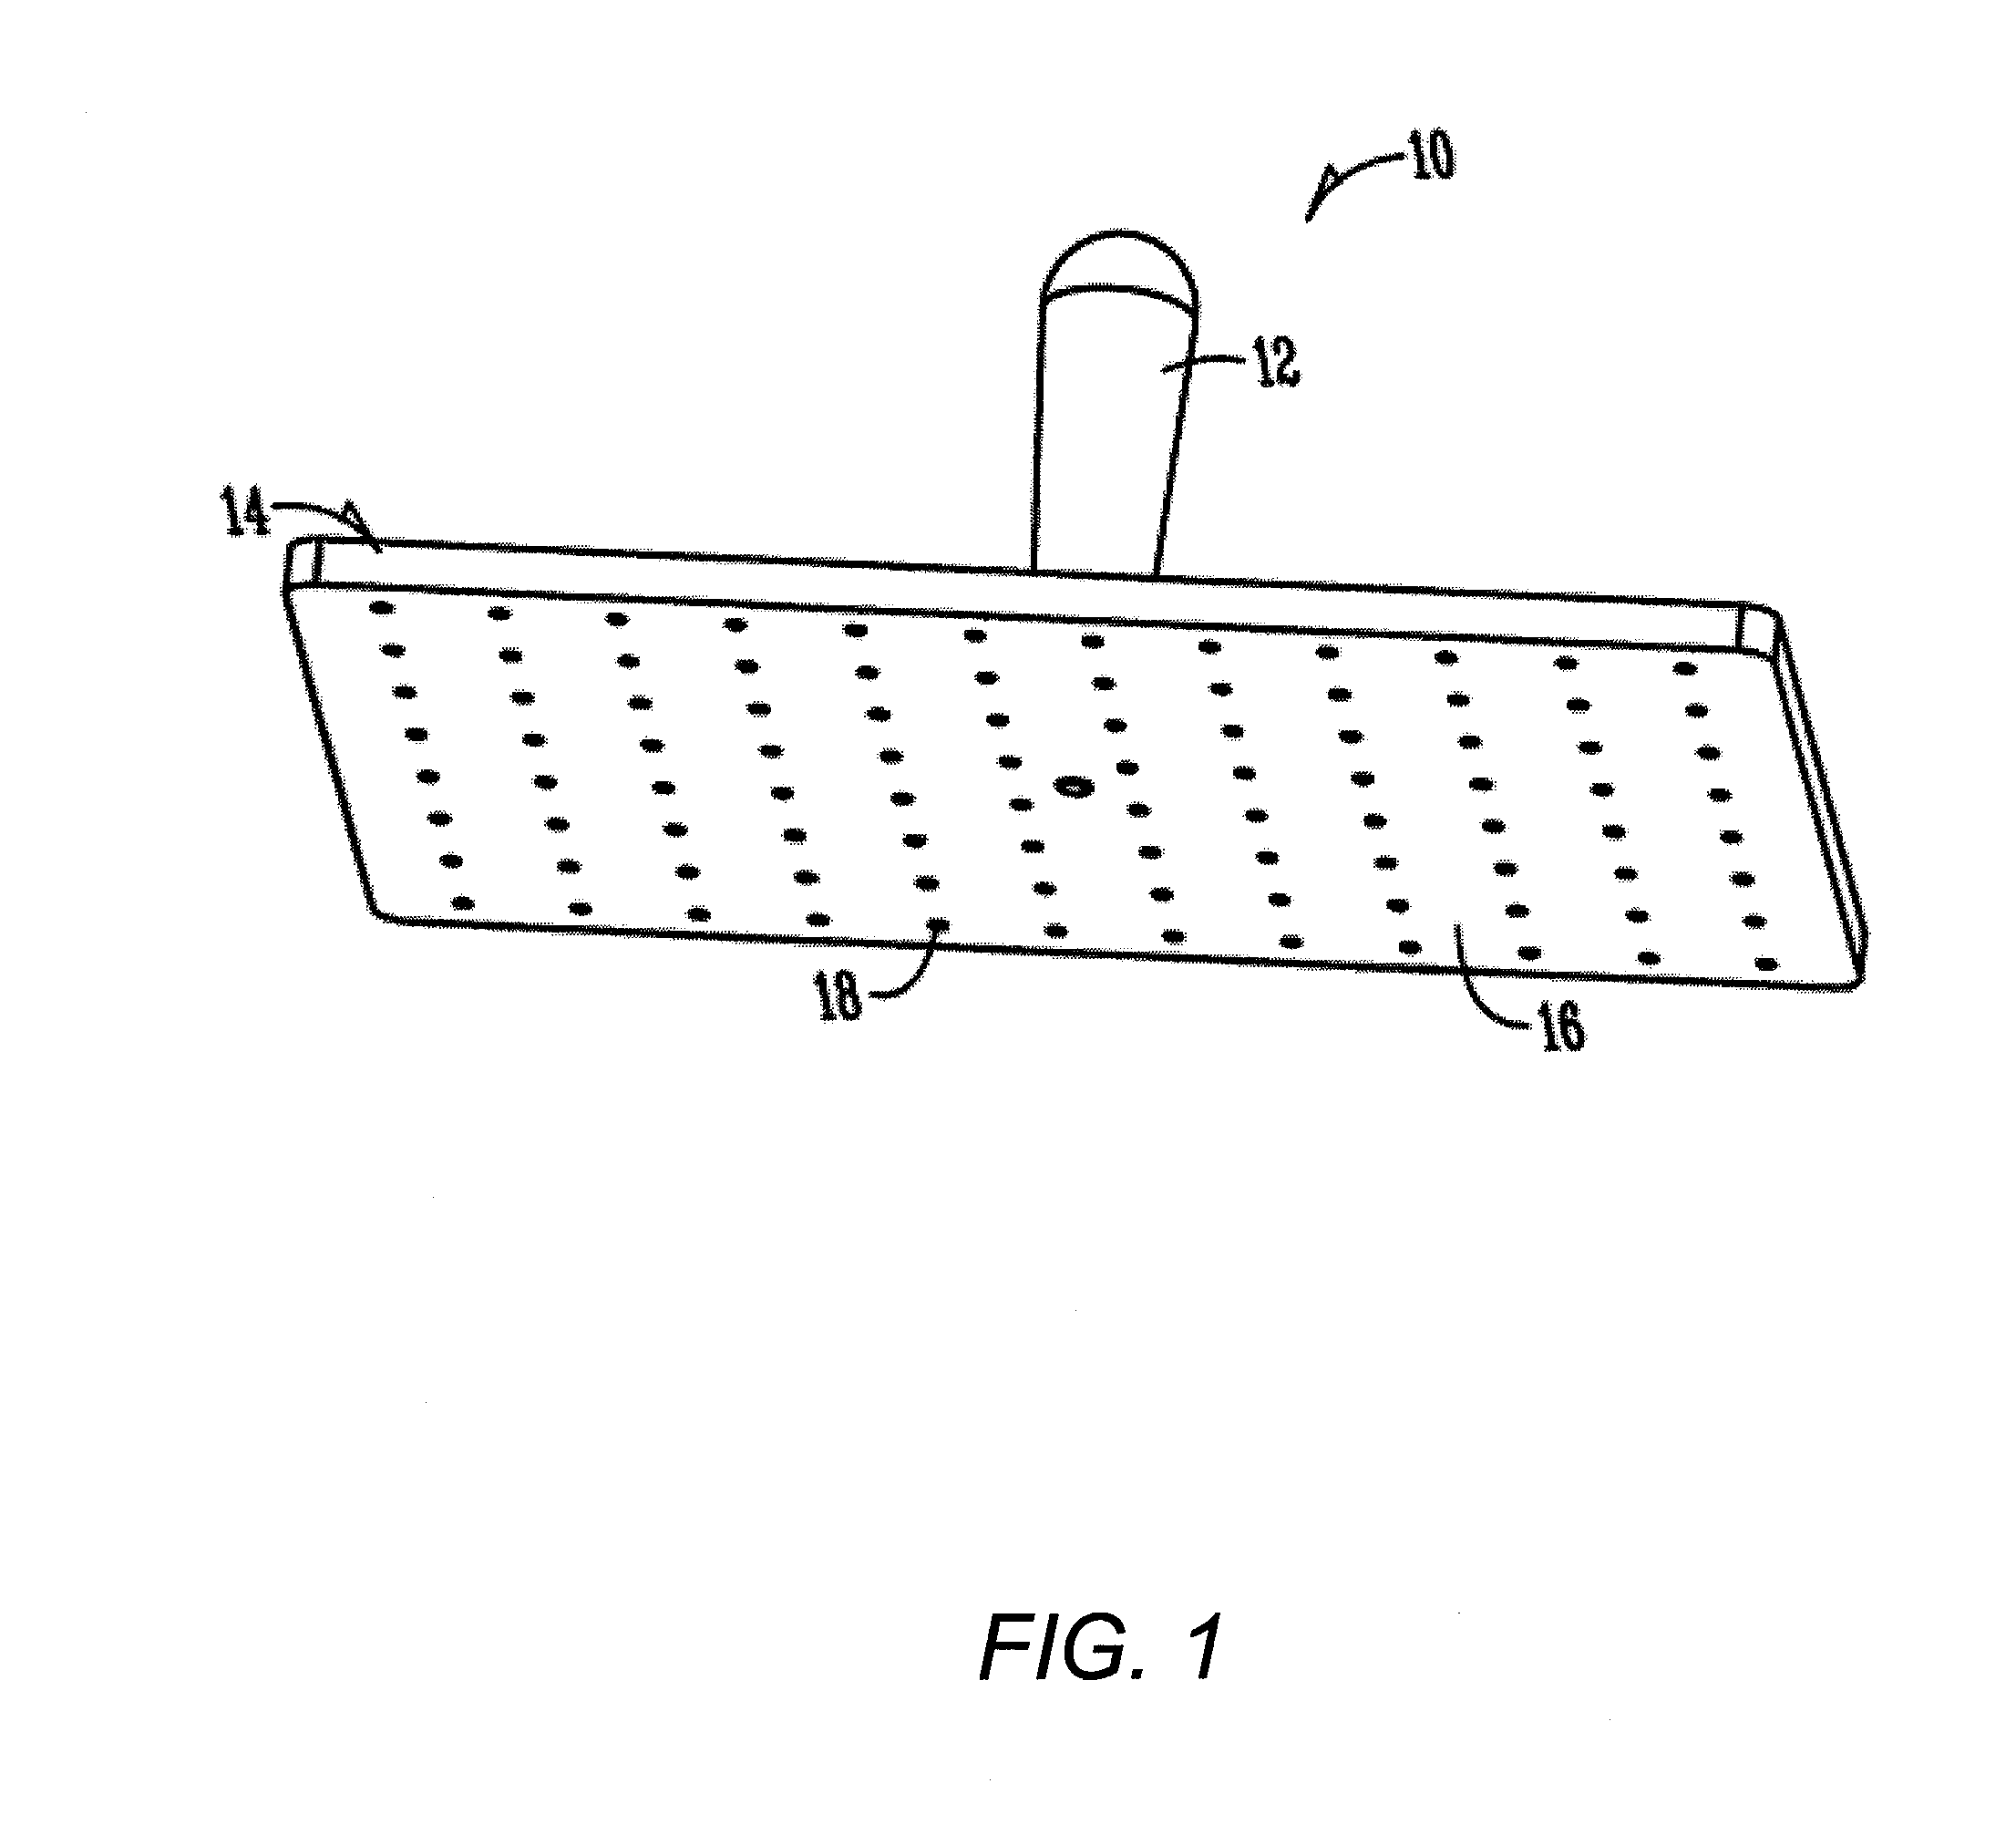 Apparatus, method and system for simultaneously picking up and releasing objects in bulk